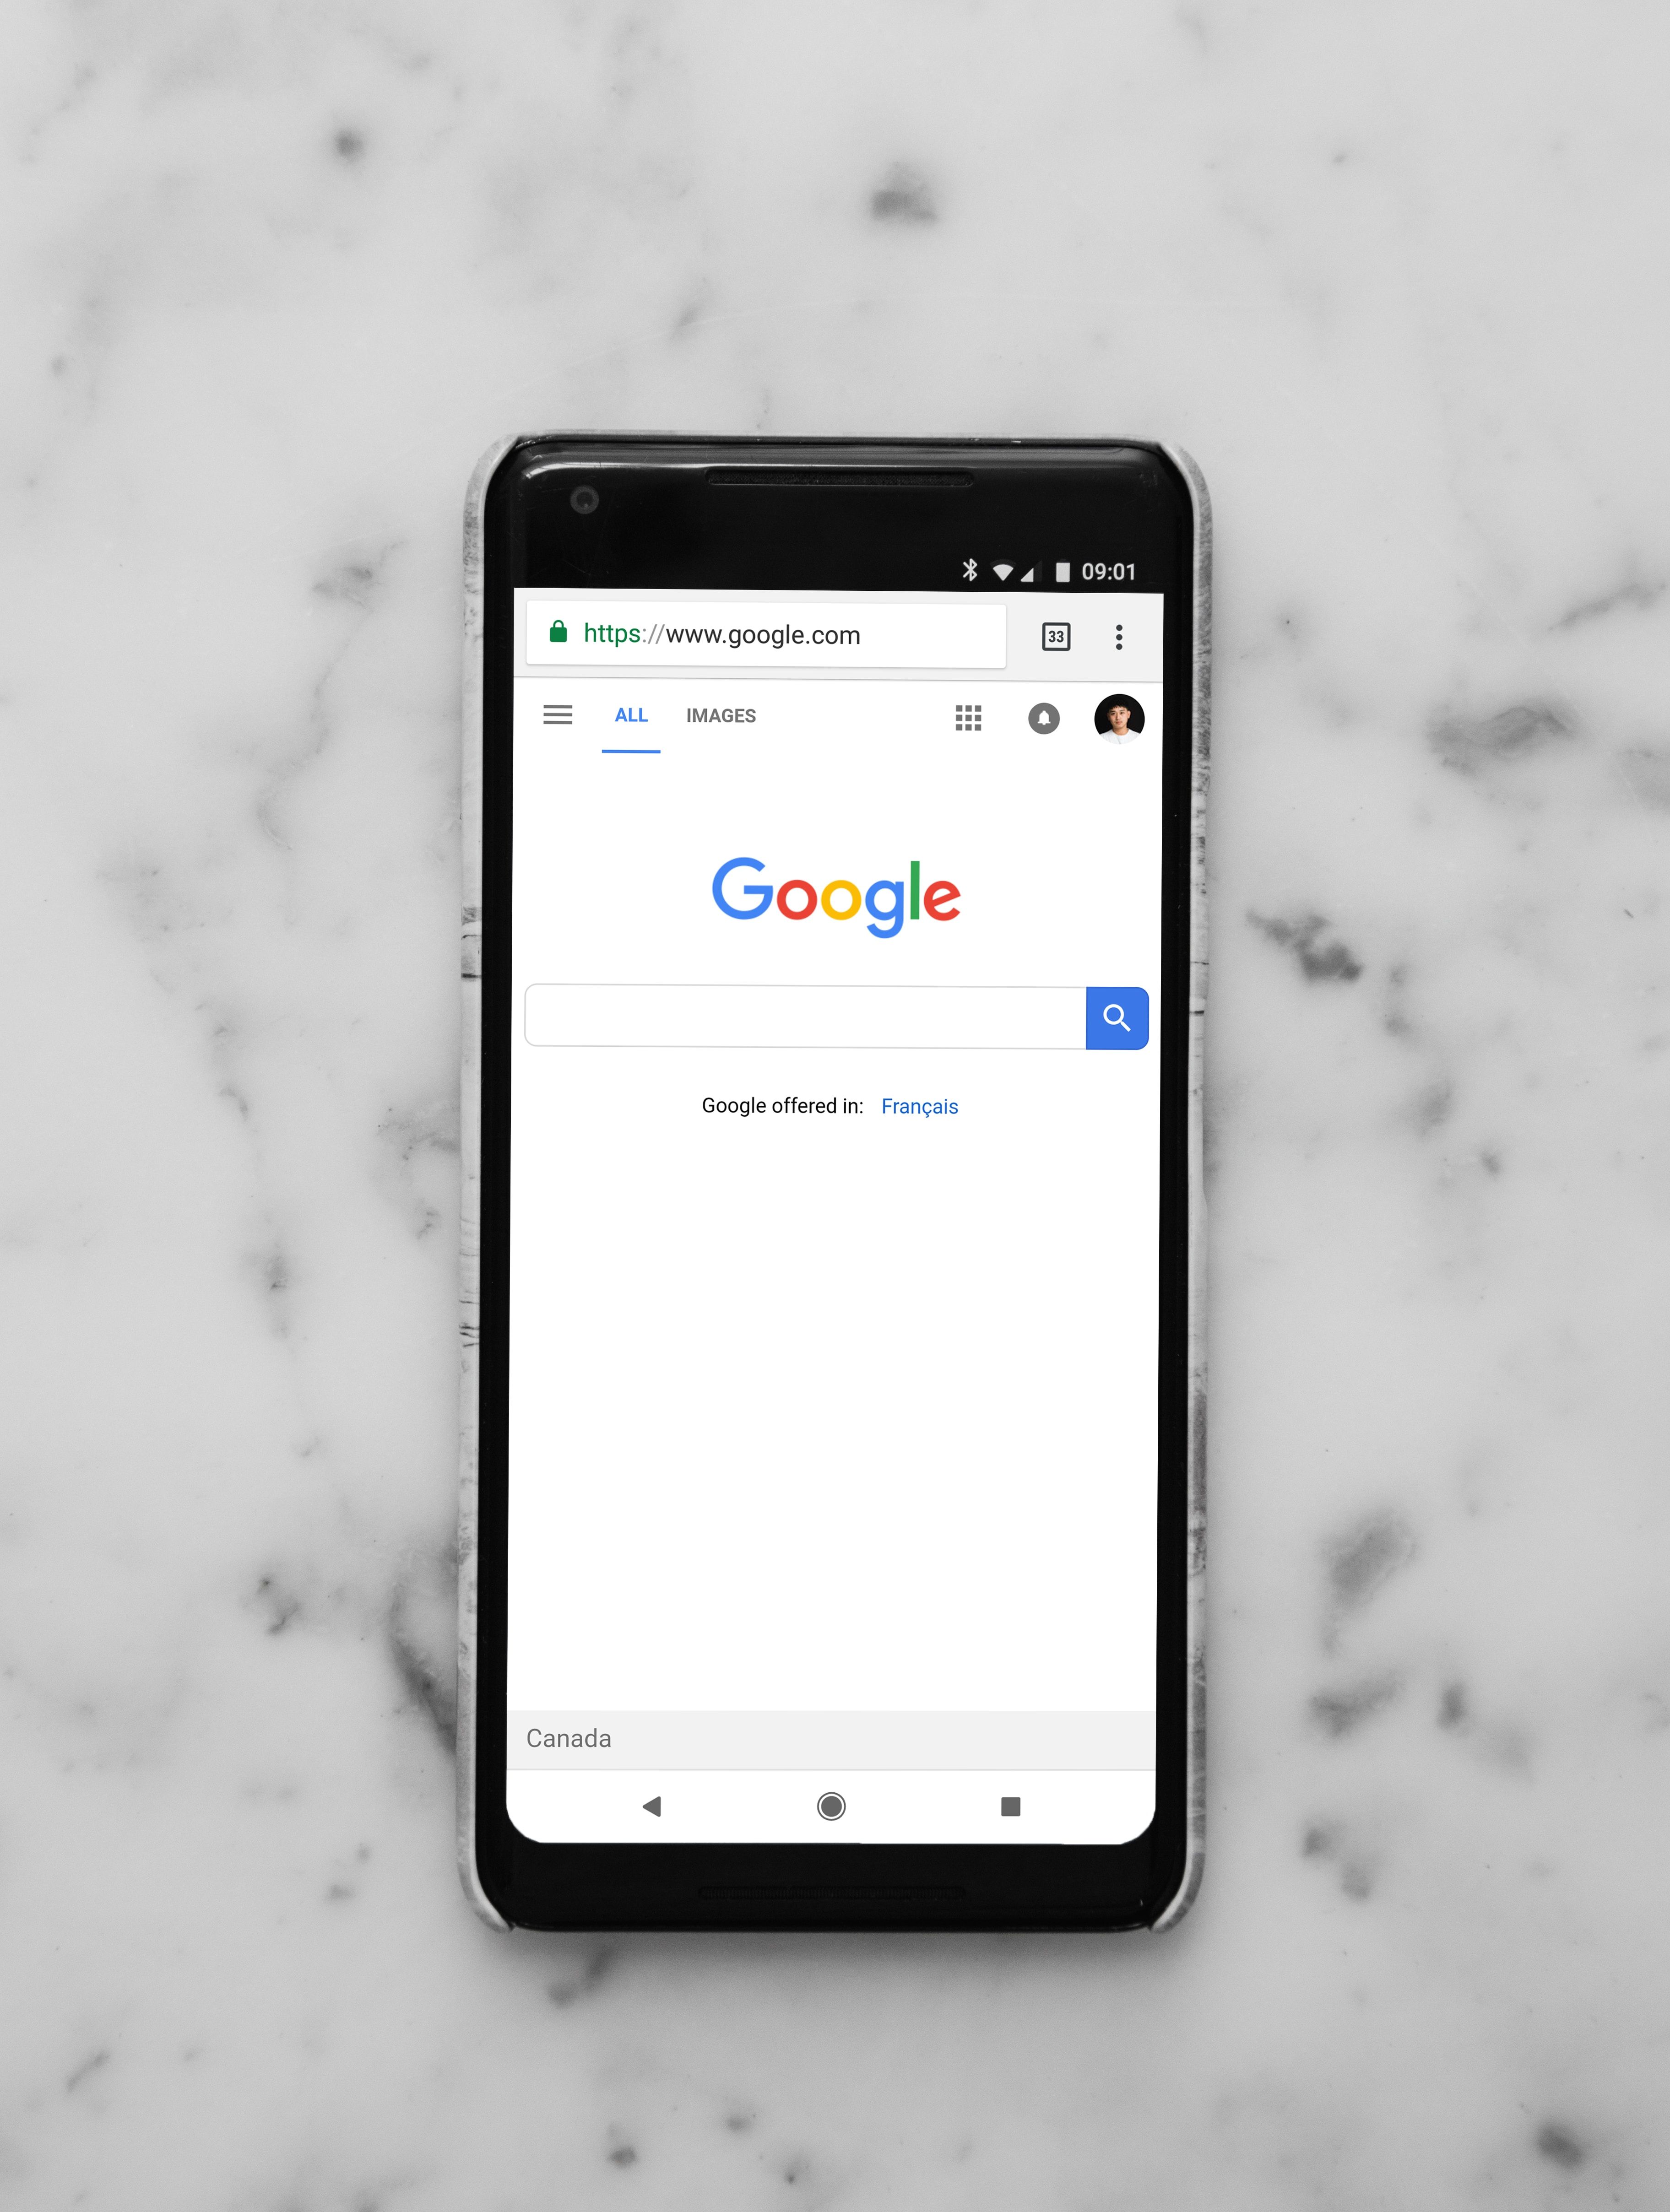 Google Search Updates: New Ways to Utilise Search